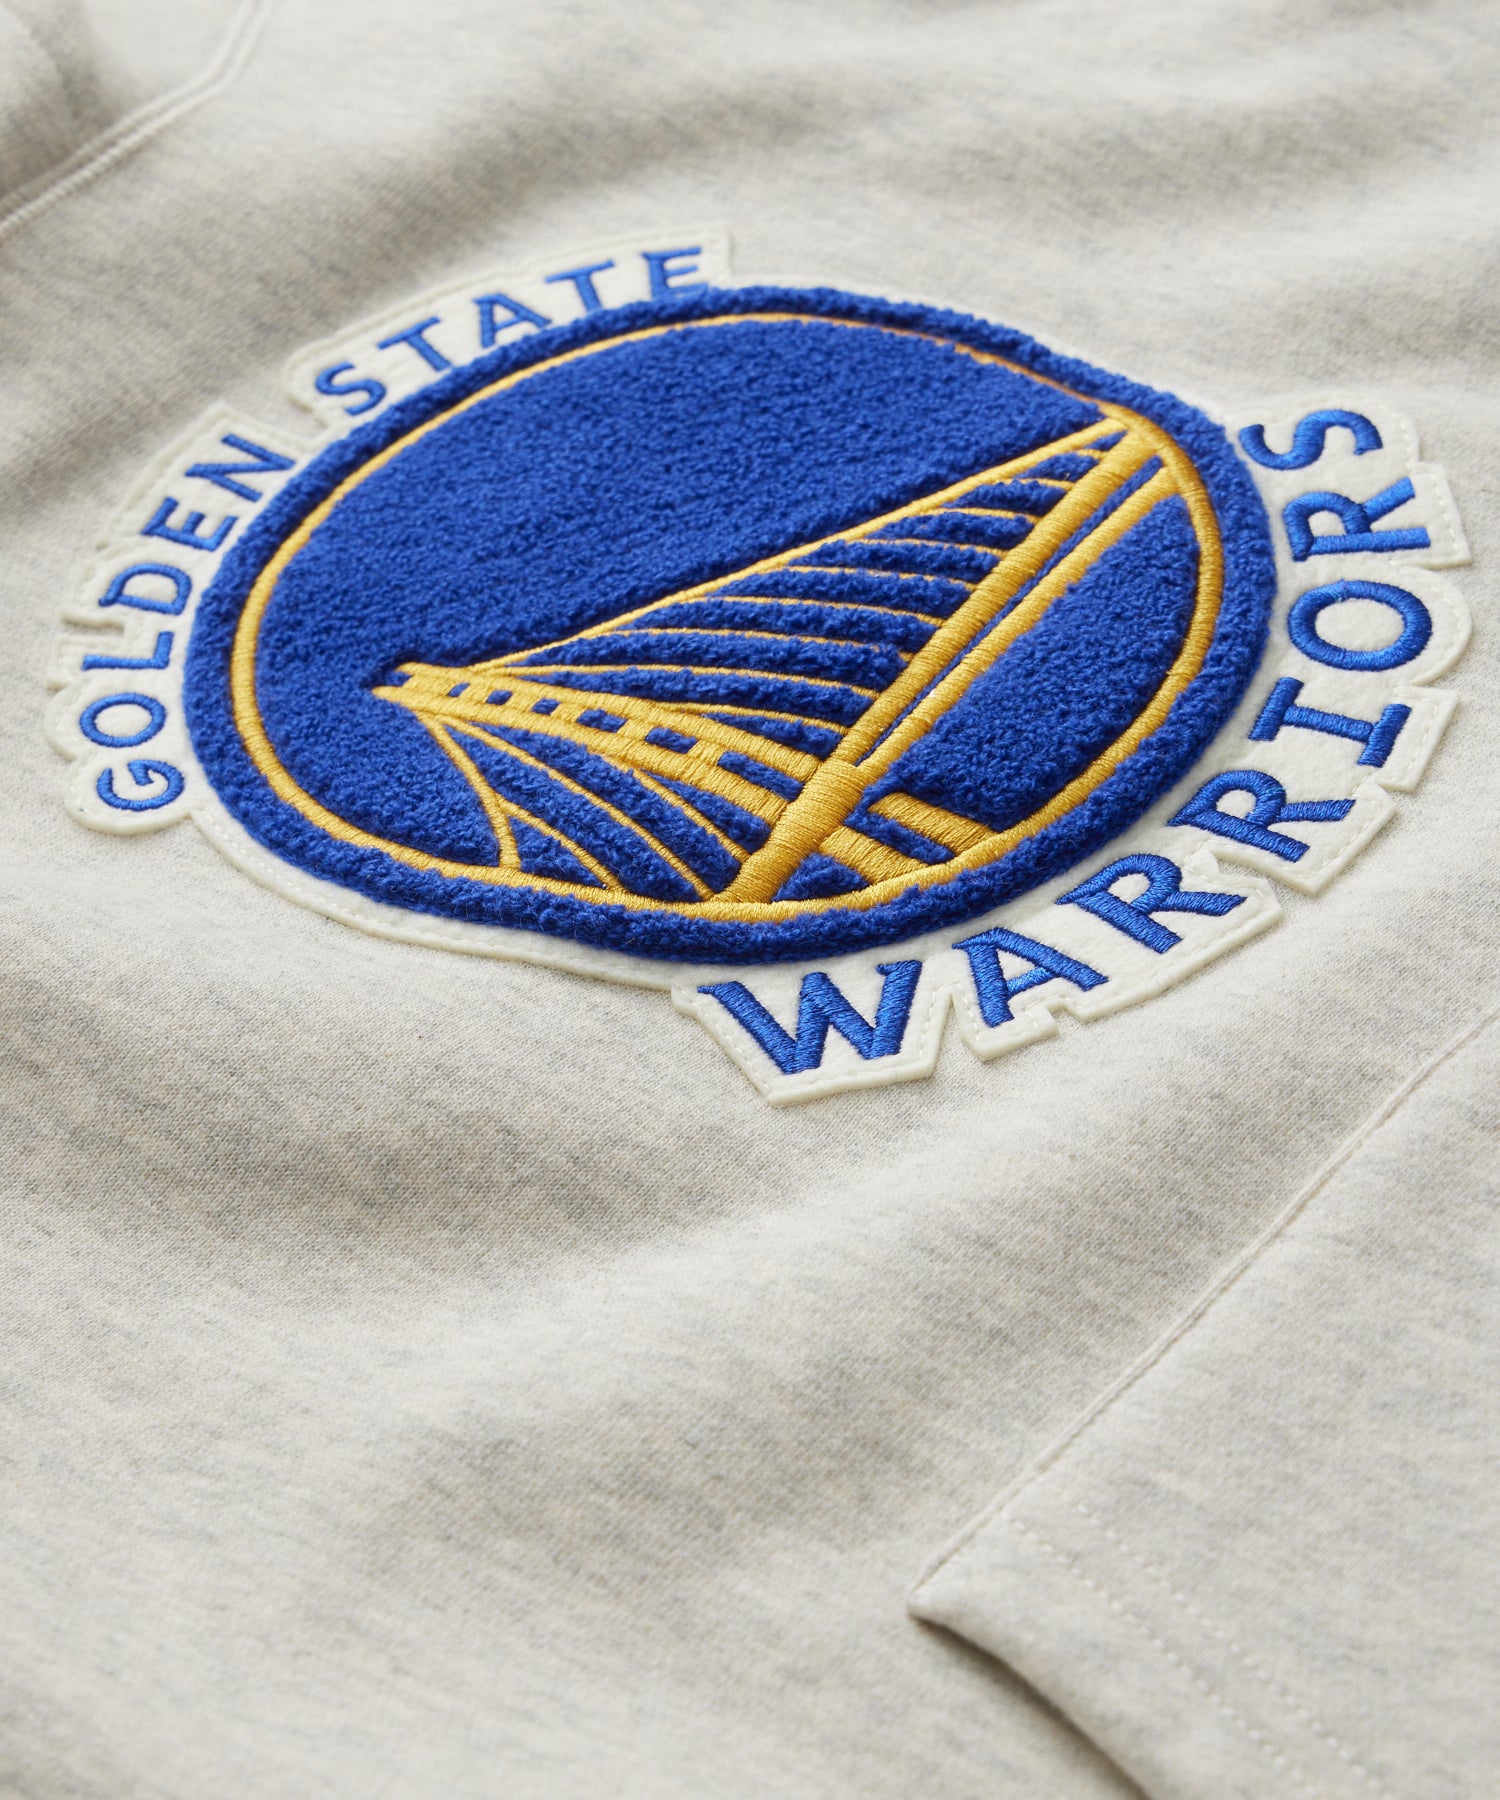 Rep the Golden State Warriors with hoodies this Fall